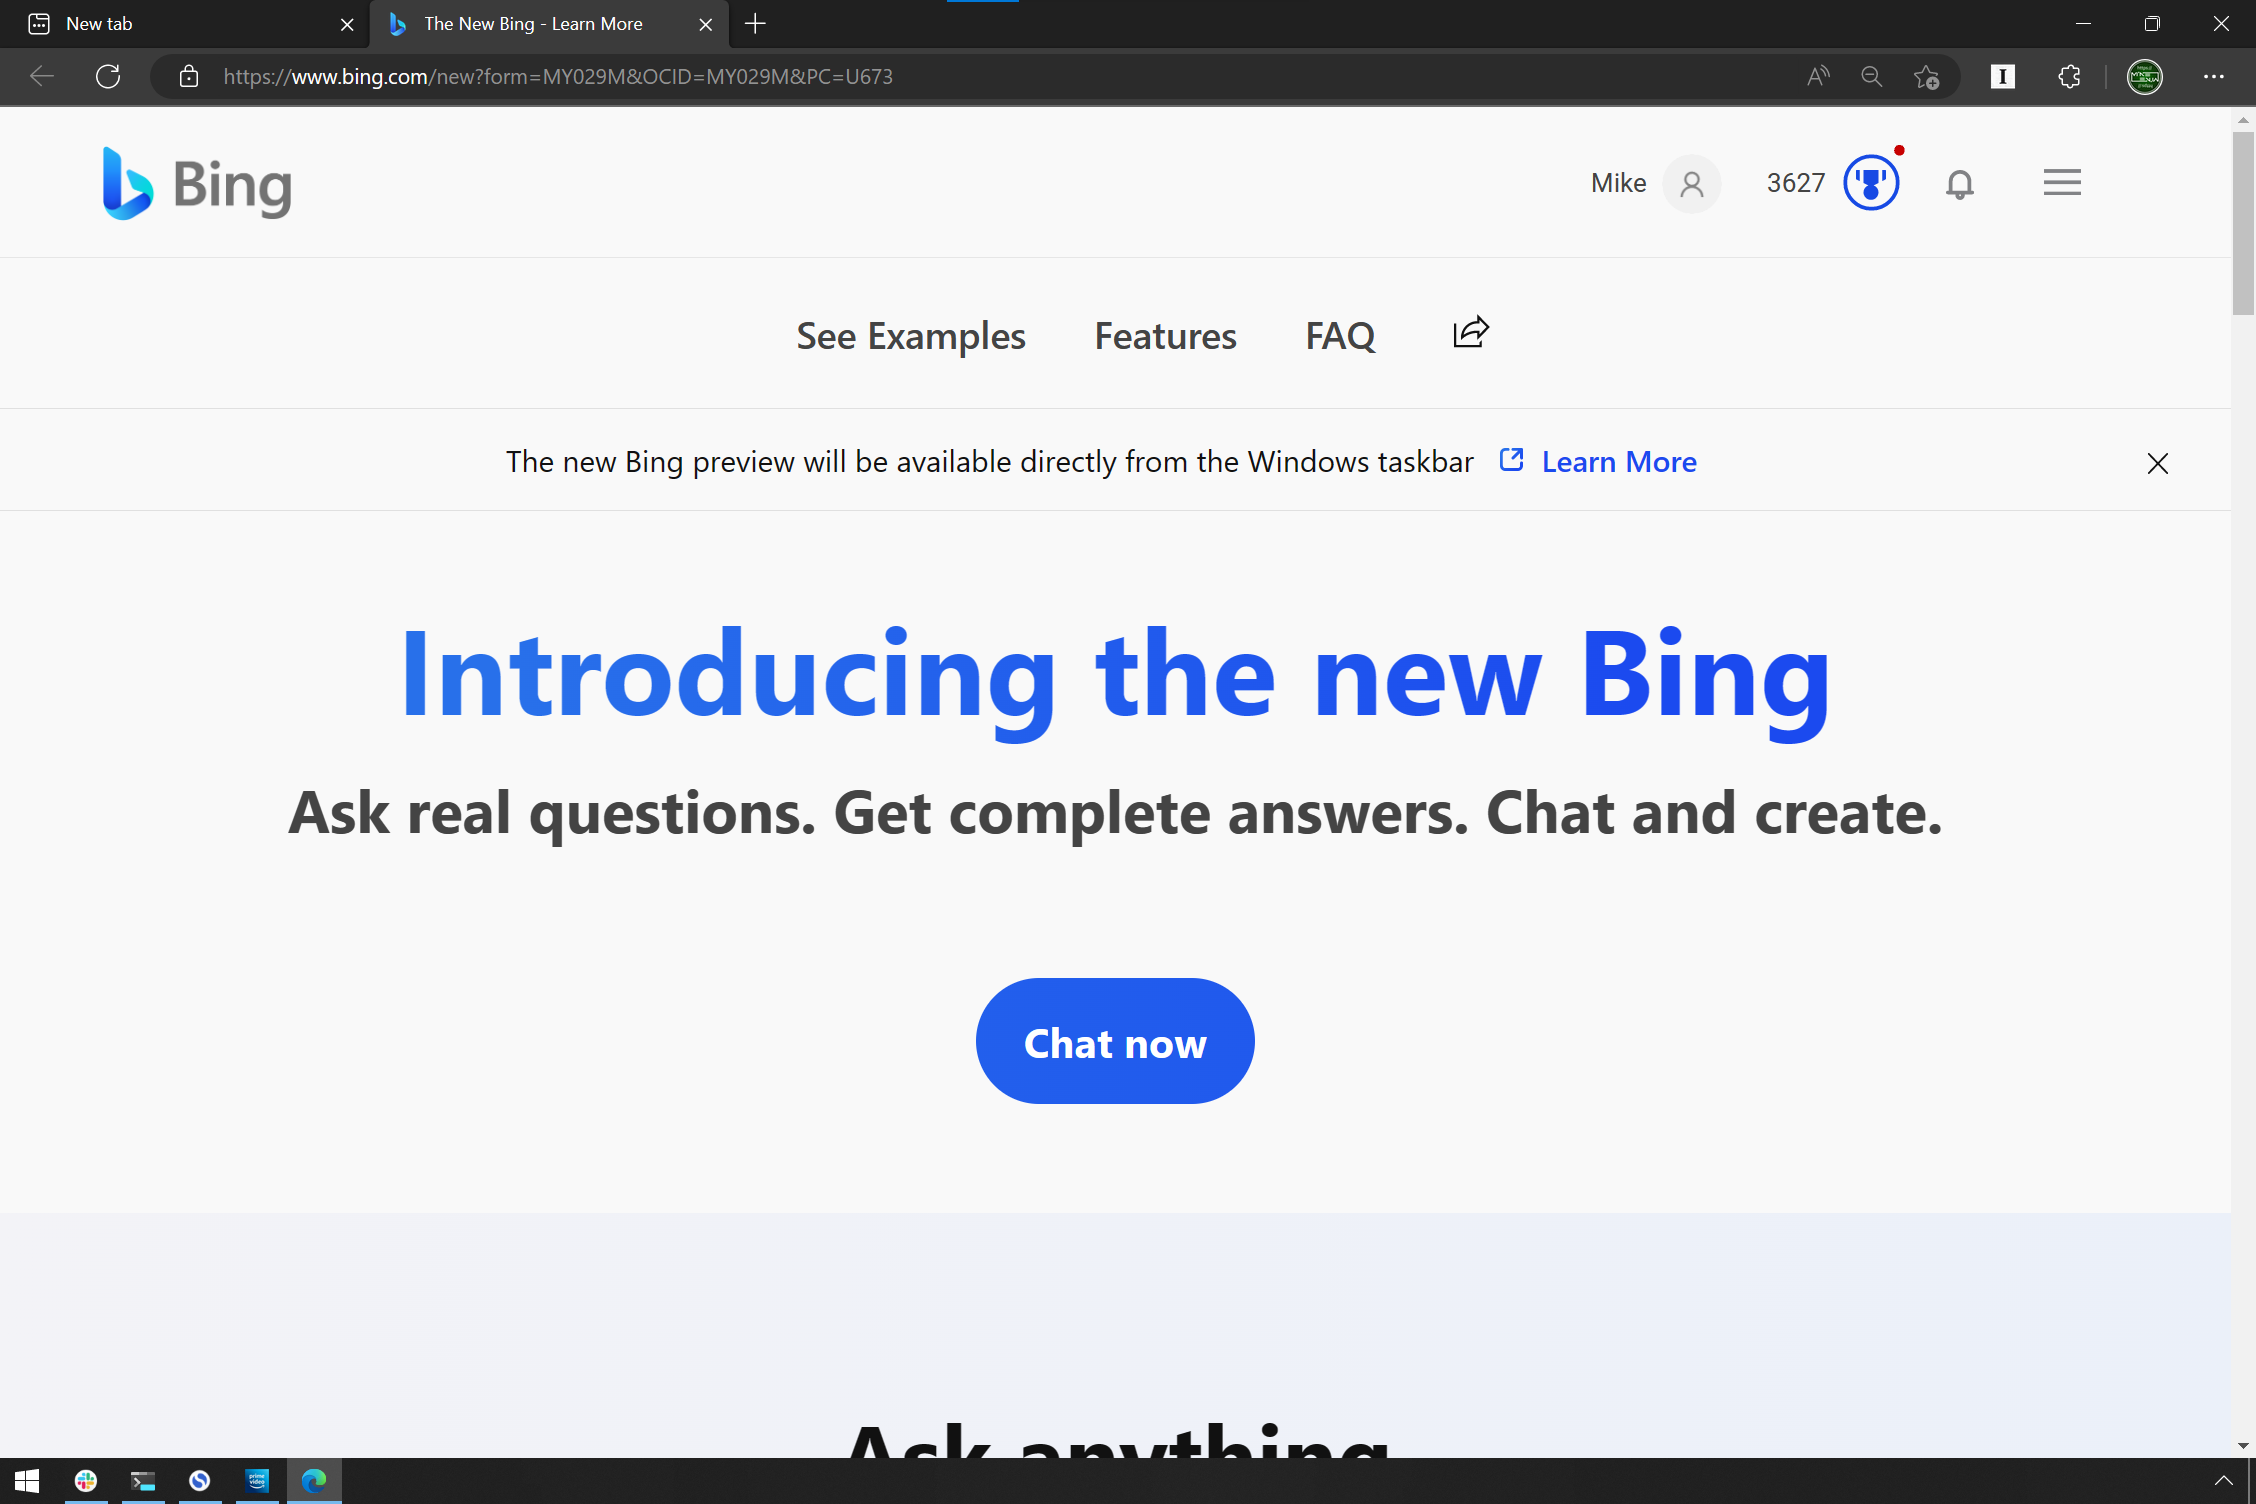 Introducing The New Bing